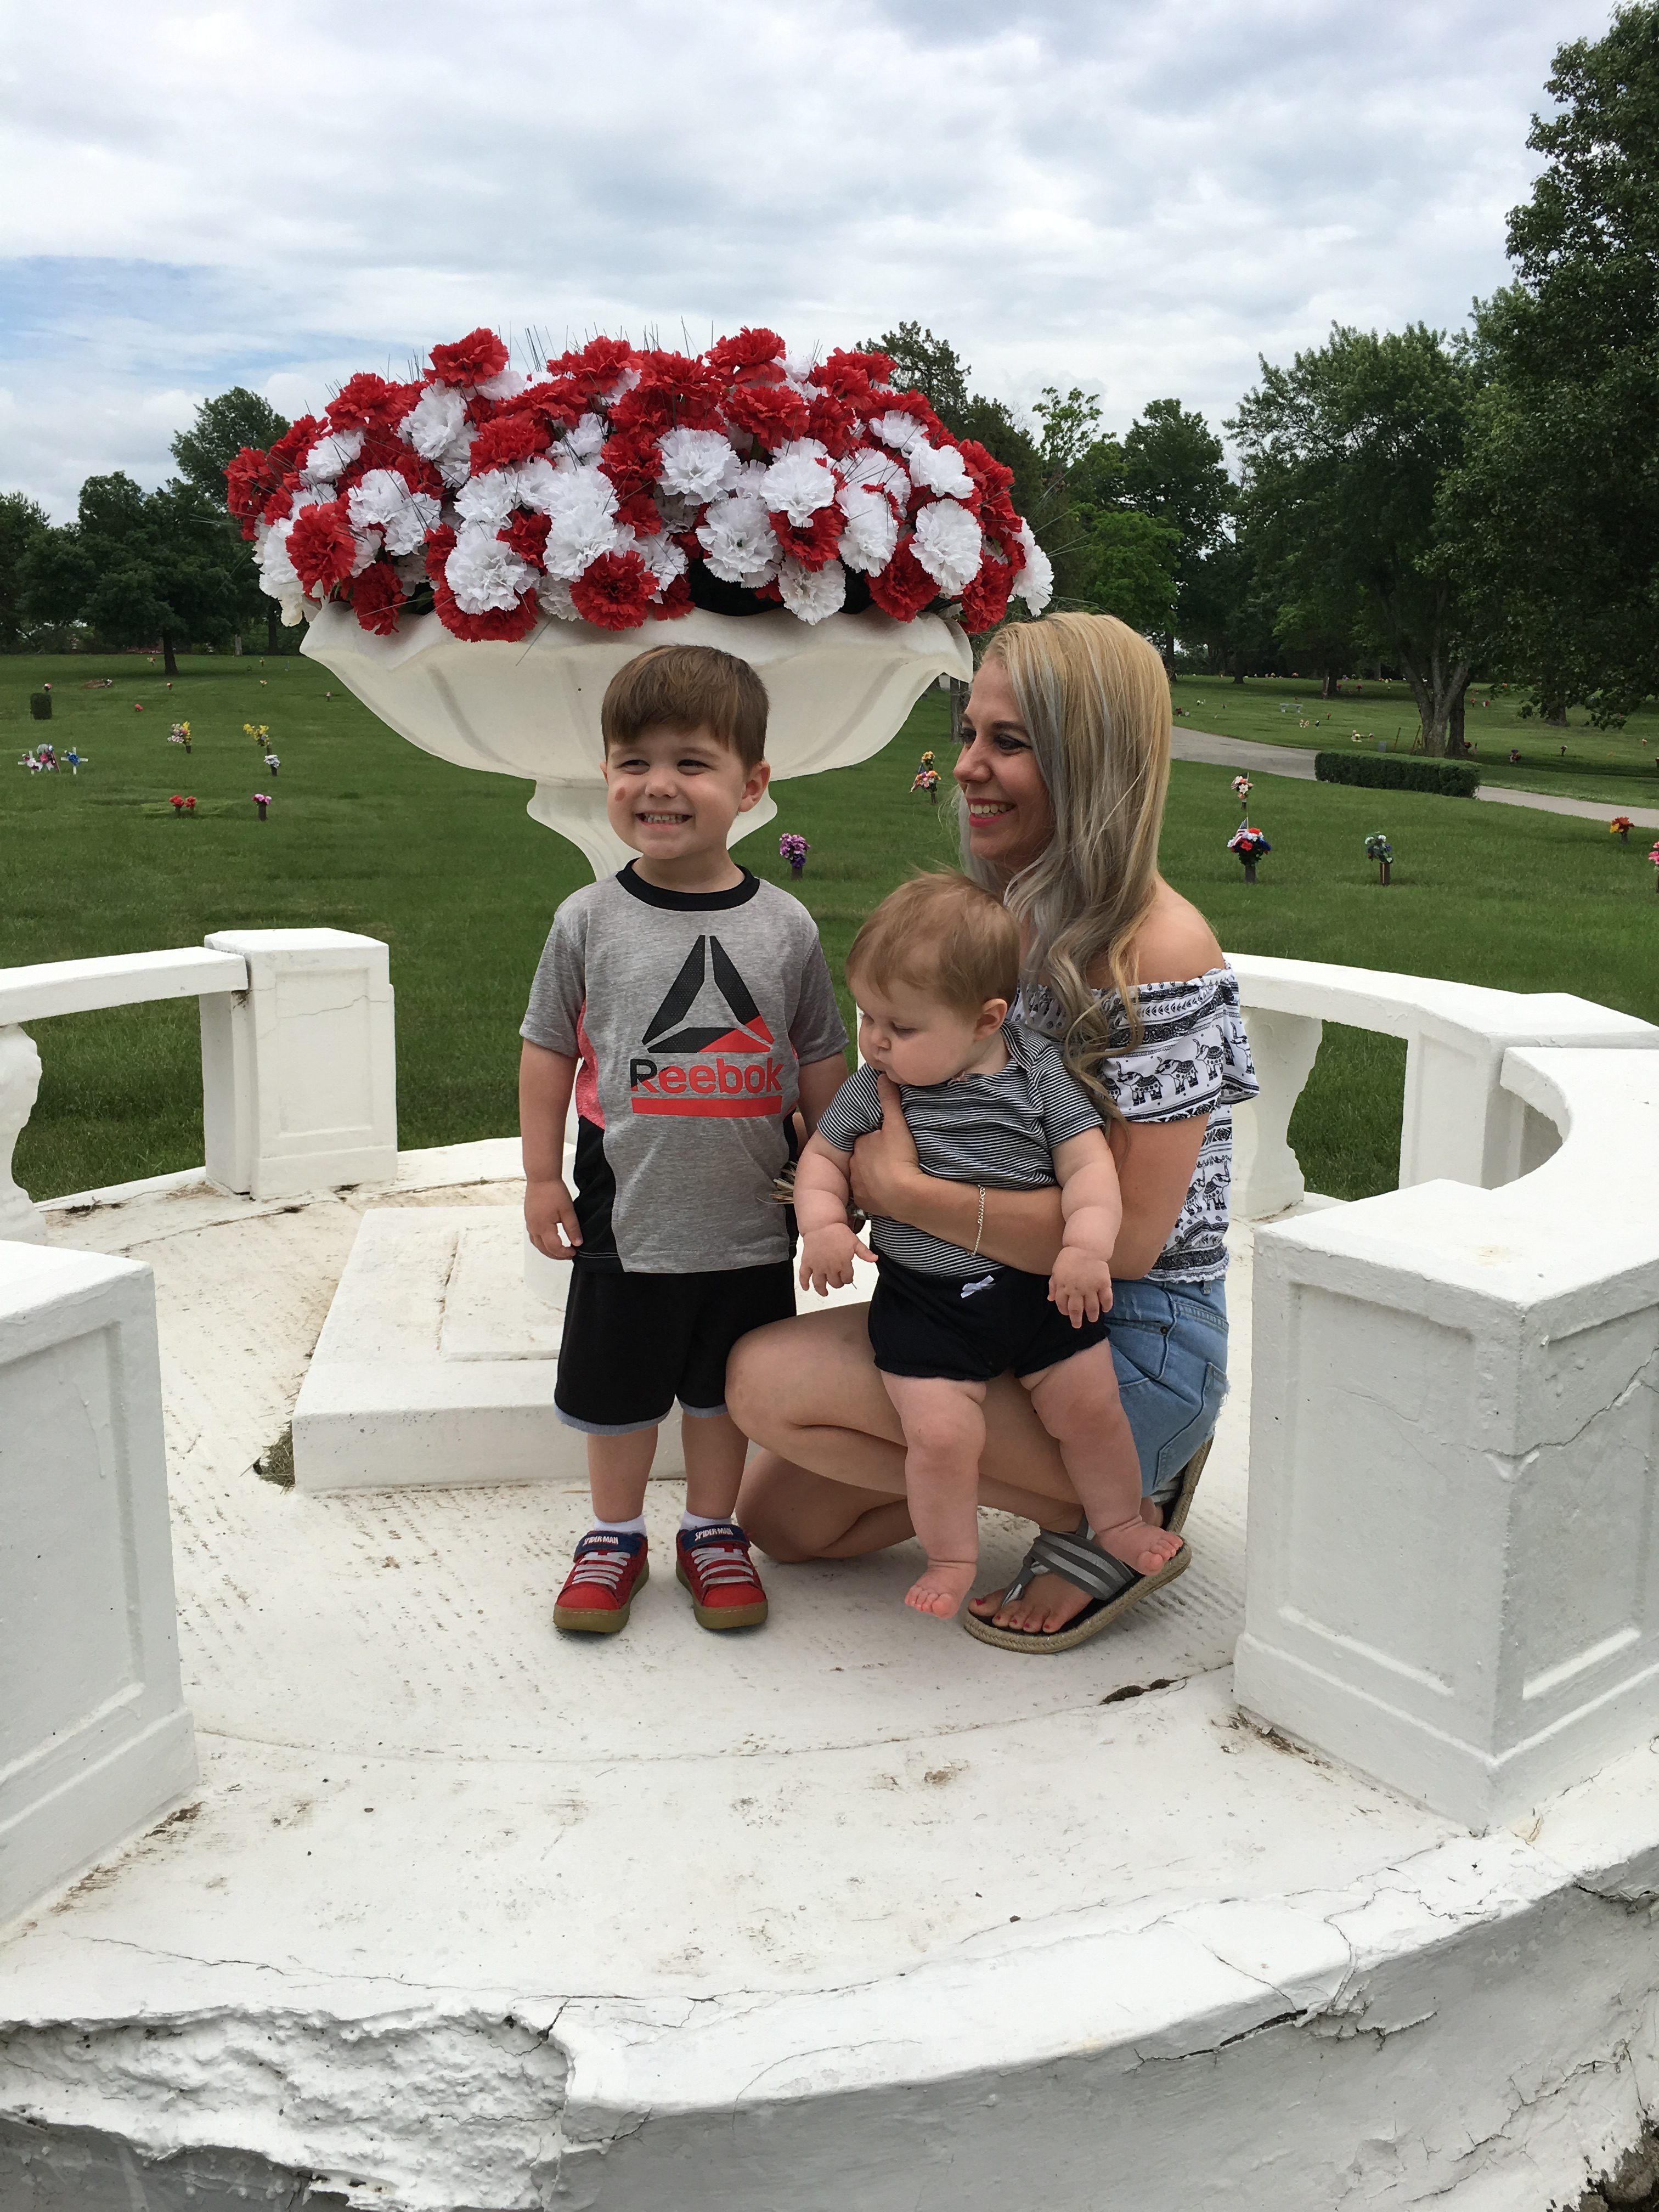 Memorial Day Weekend Recap 2018: How our family of 4 spent Memorial Weekend in Kansas City! Most importantly, we had lots of quality family time. Memorial Day weekend is the kick-off to summer, so here are some family-friendly summer activities for Kansas City families.